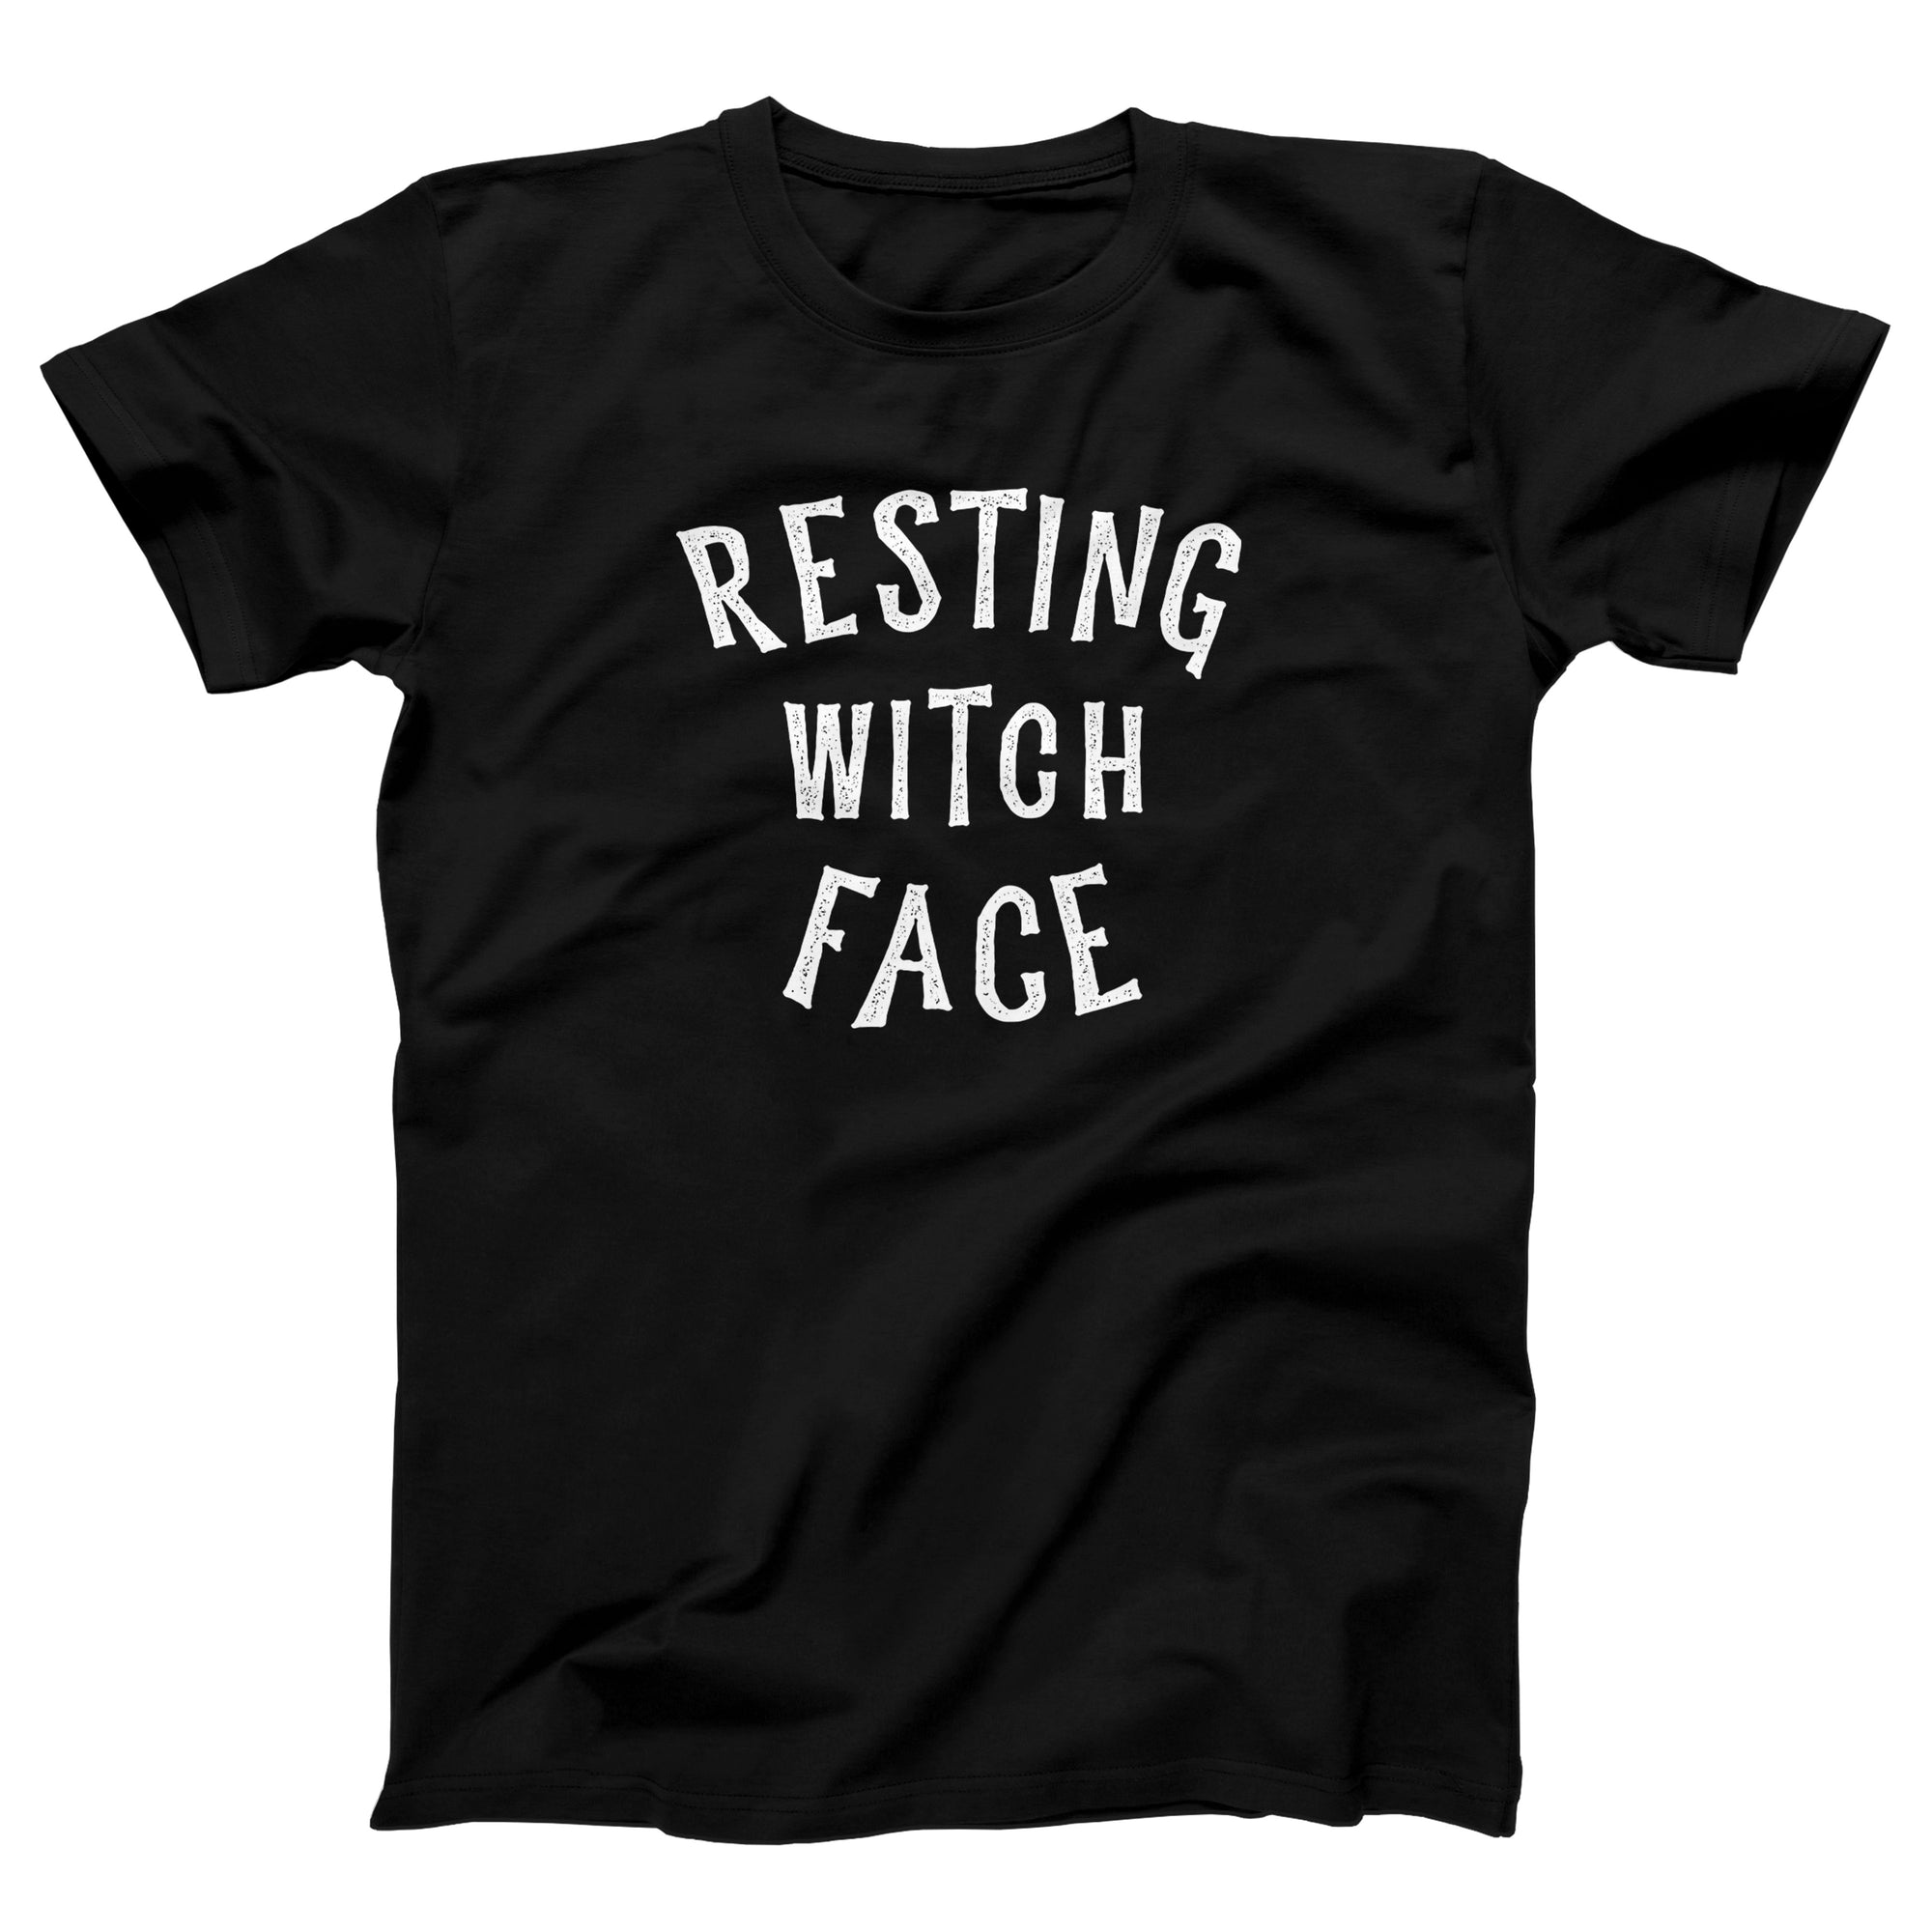 Resting Witch Face Adult Unisex T-Shirt - anishphilip